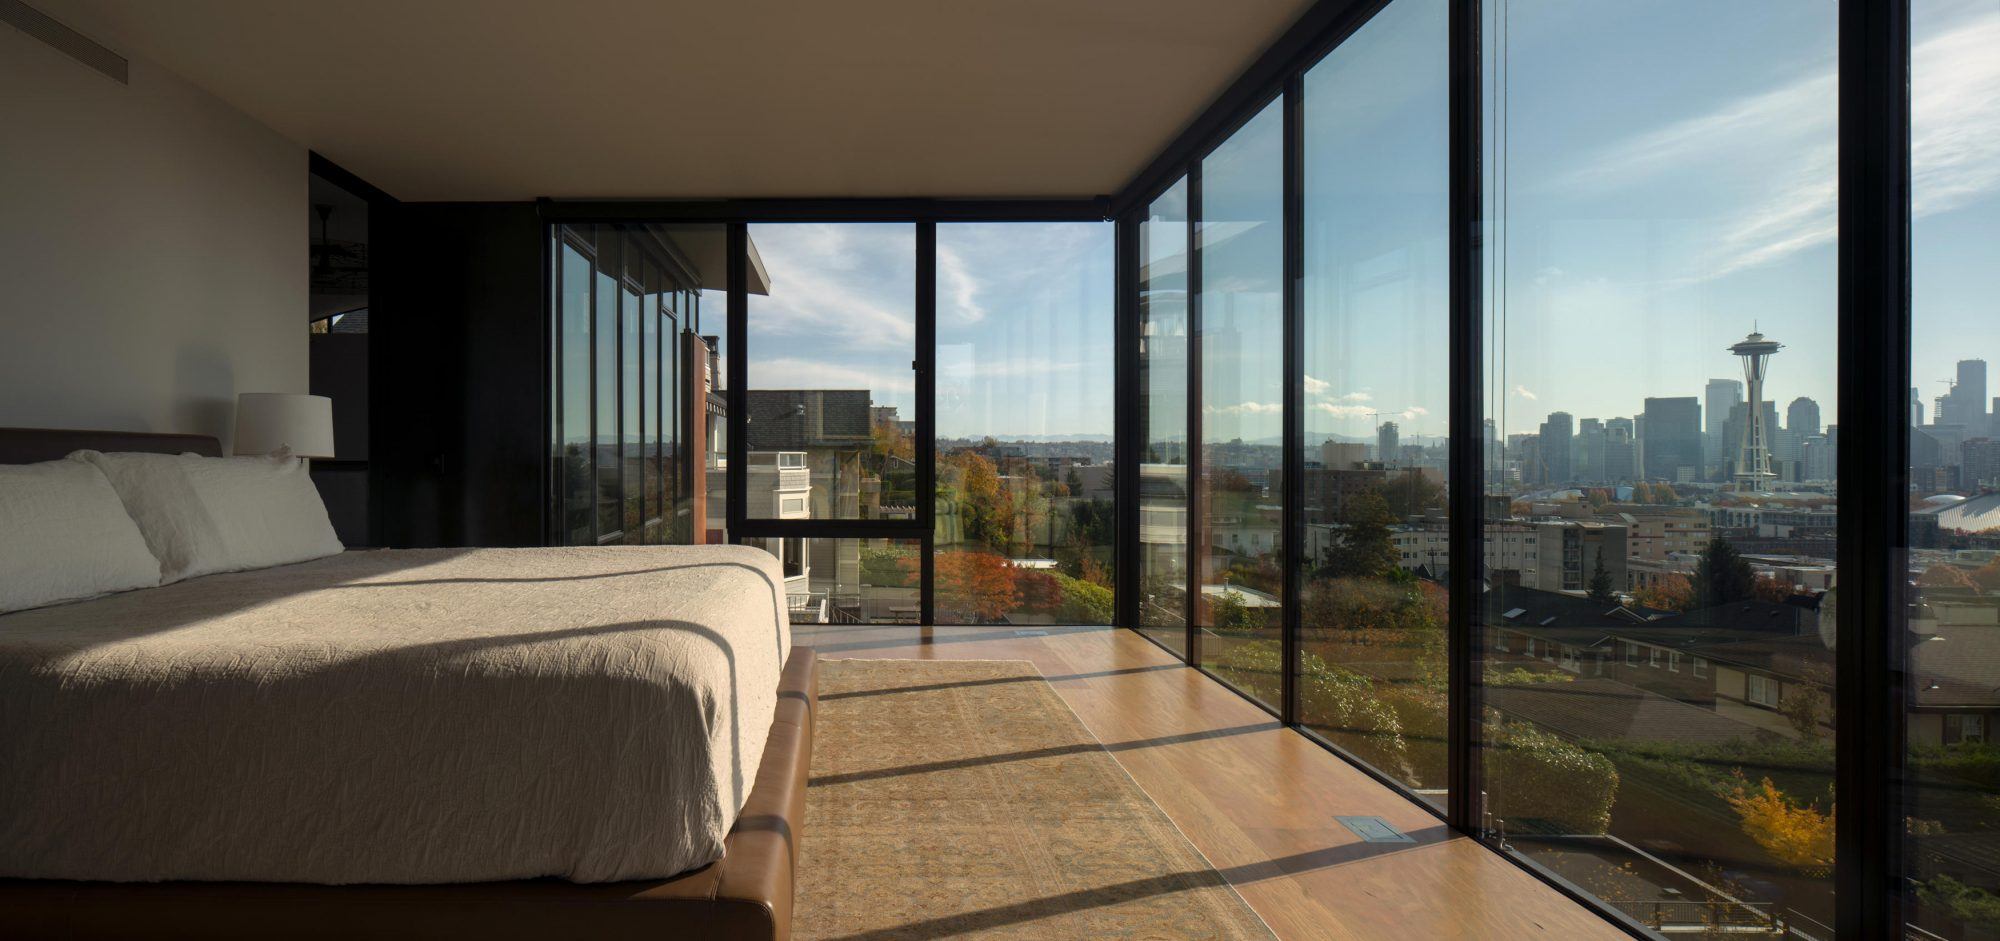 Modern Bedroom House Architecture Bed Space Needle Seattle 2000x941